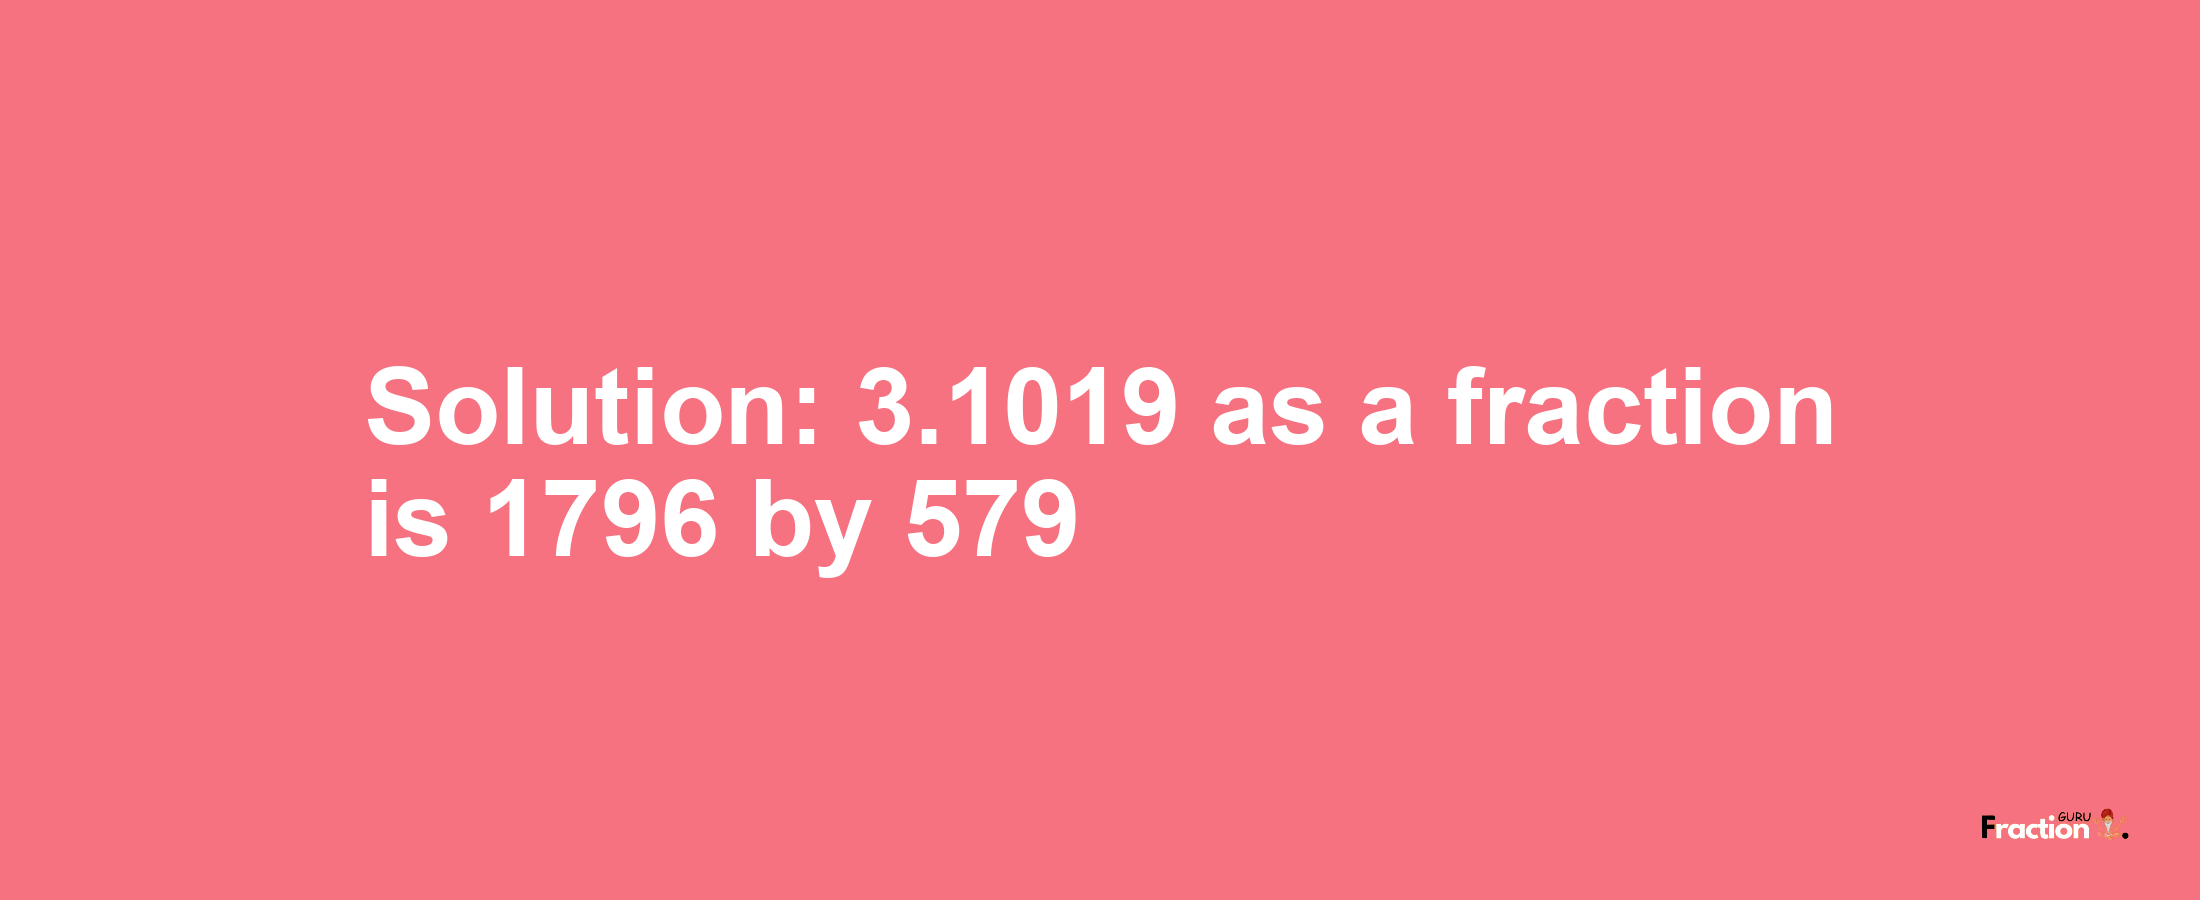 Solution:3.1019 as a fraction is 1796/579